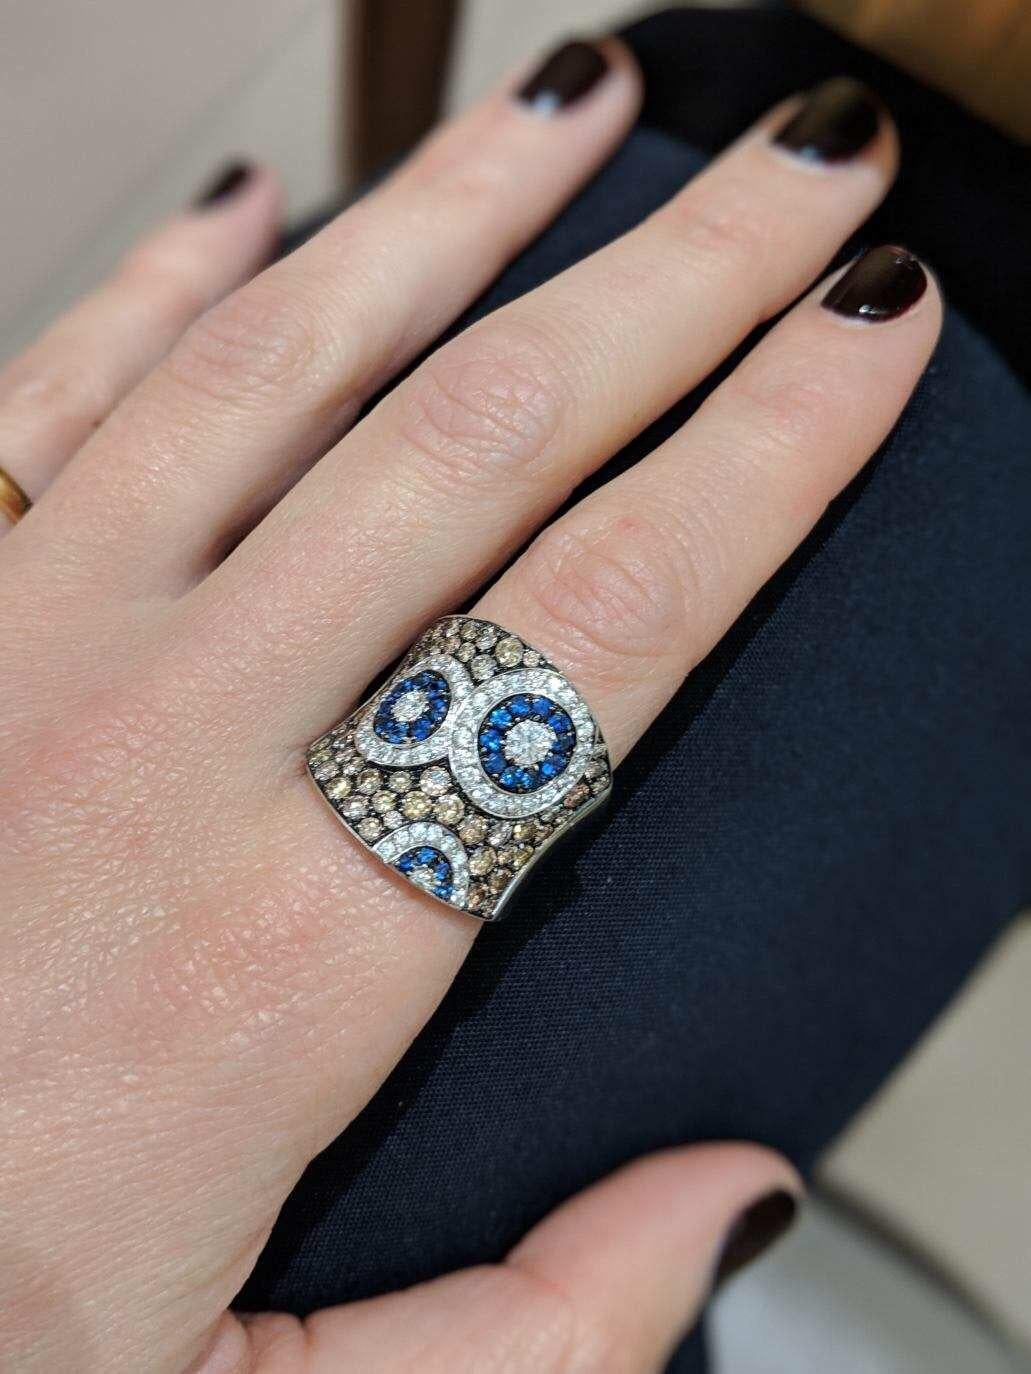 This Cellini Jewelers ring features a Kaleidoscope of white diamonds, and blue sapphire which are set within a brown diamond concave shaped ring. Set in 18 karat white gold. 
This whimsical design is part of the exclusive collection created for